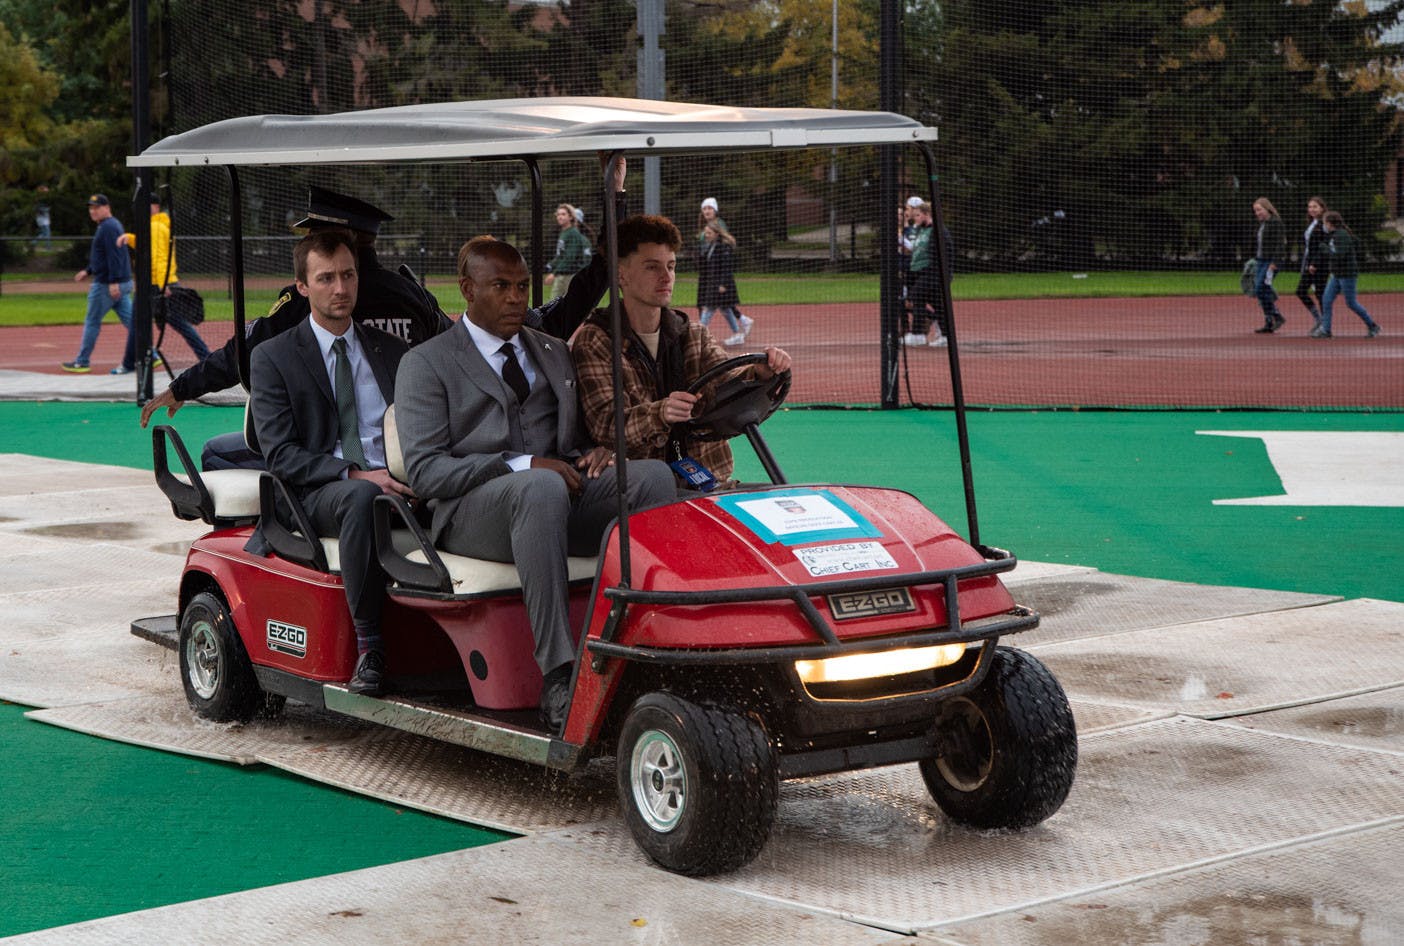 <p>Football head coach Mel Tucker arrives at the broadcast via golf cart and was scheduled to speak live at 9:20 a.m. Michigan State and Michigan fans gathered with signs for the broadcast of ESPN&#x27;s College GameDay, which took place at Ralph Young Field at 9 a.m. Shot on Oct. 30, 2021. </p>